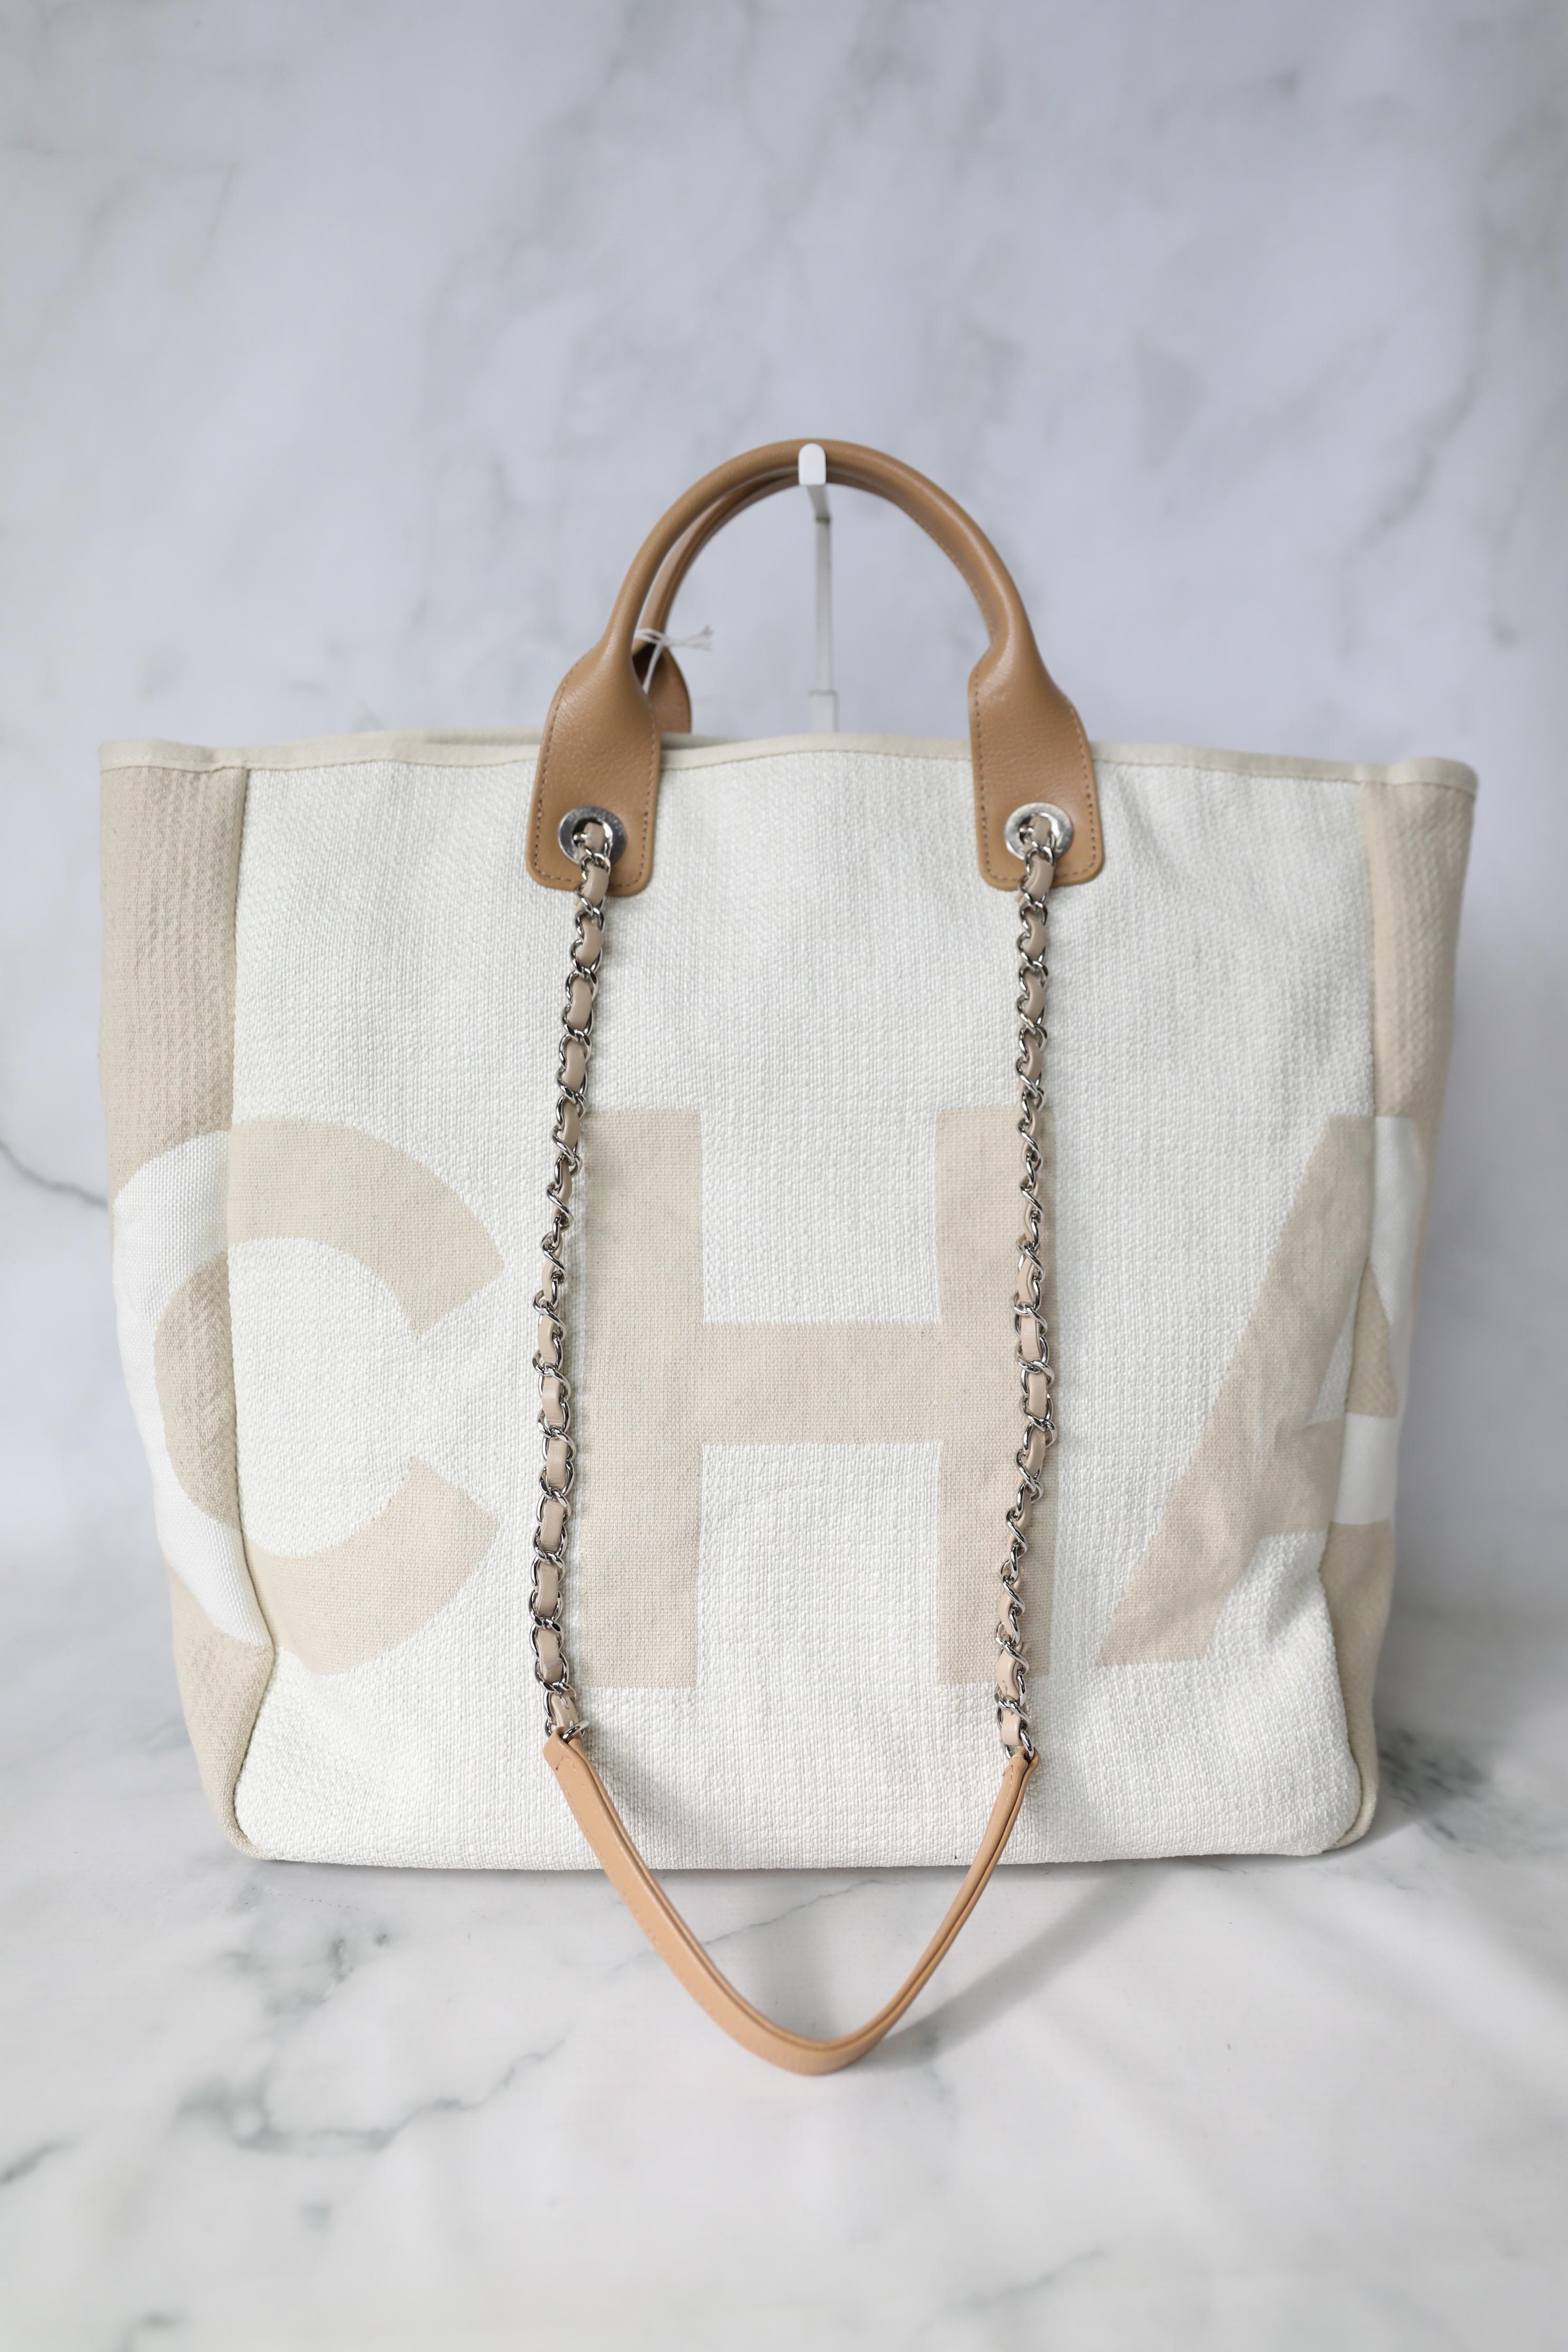 Chanel Deauville Large, Beige and White Striped Canvas with Gold Hardware,  Preowned in Dustbag WA001